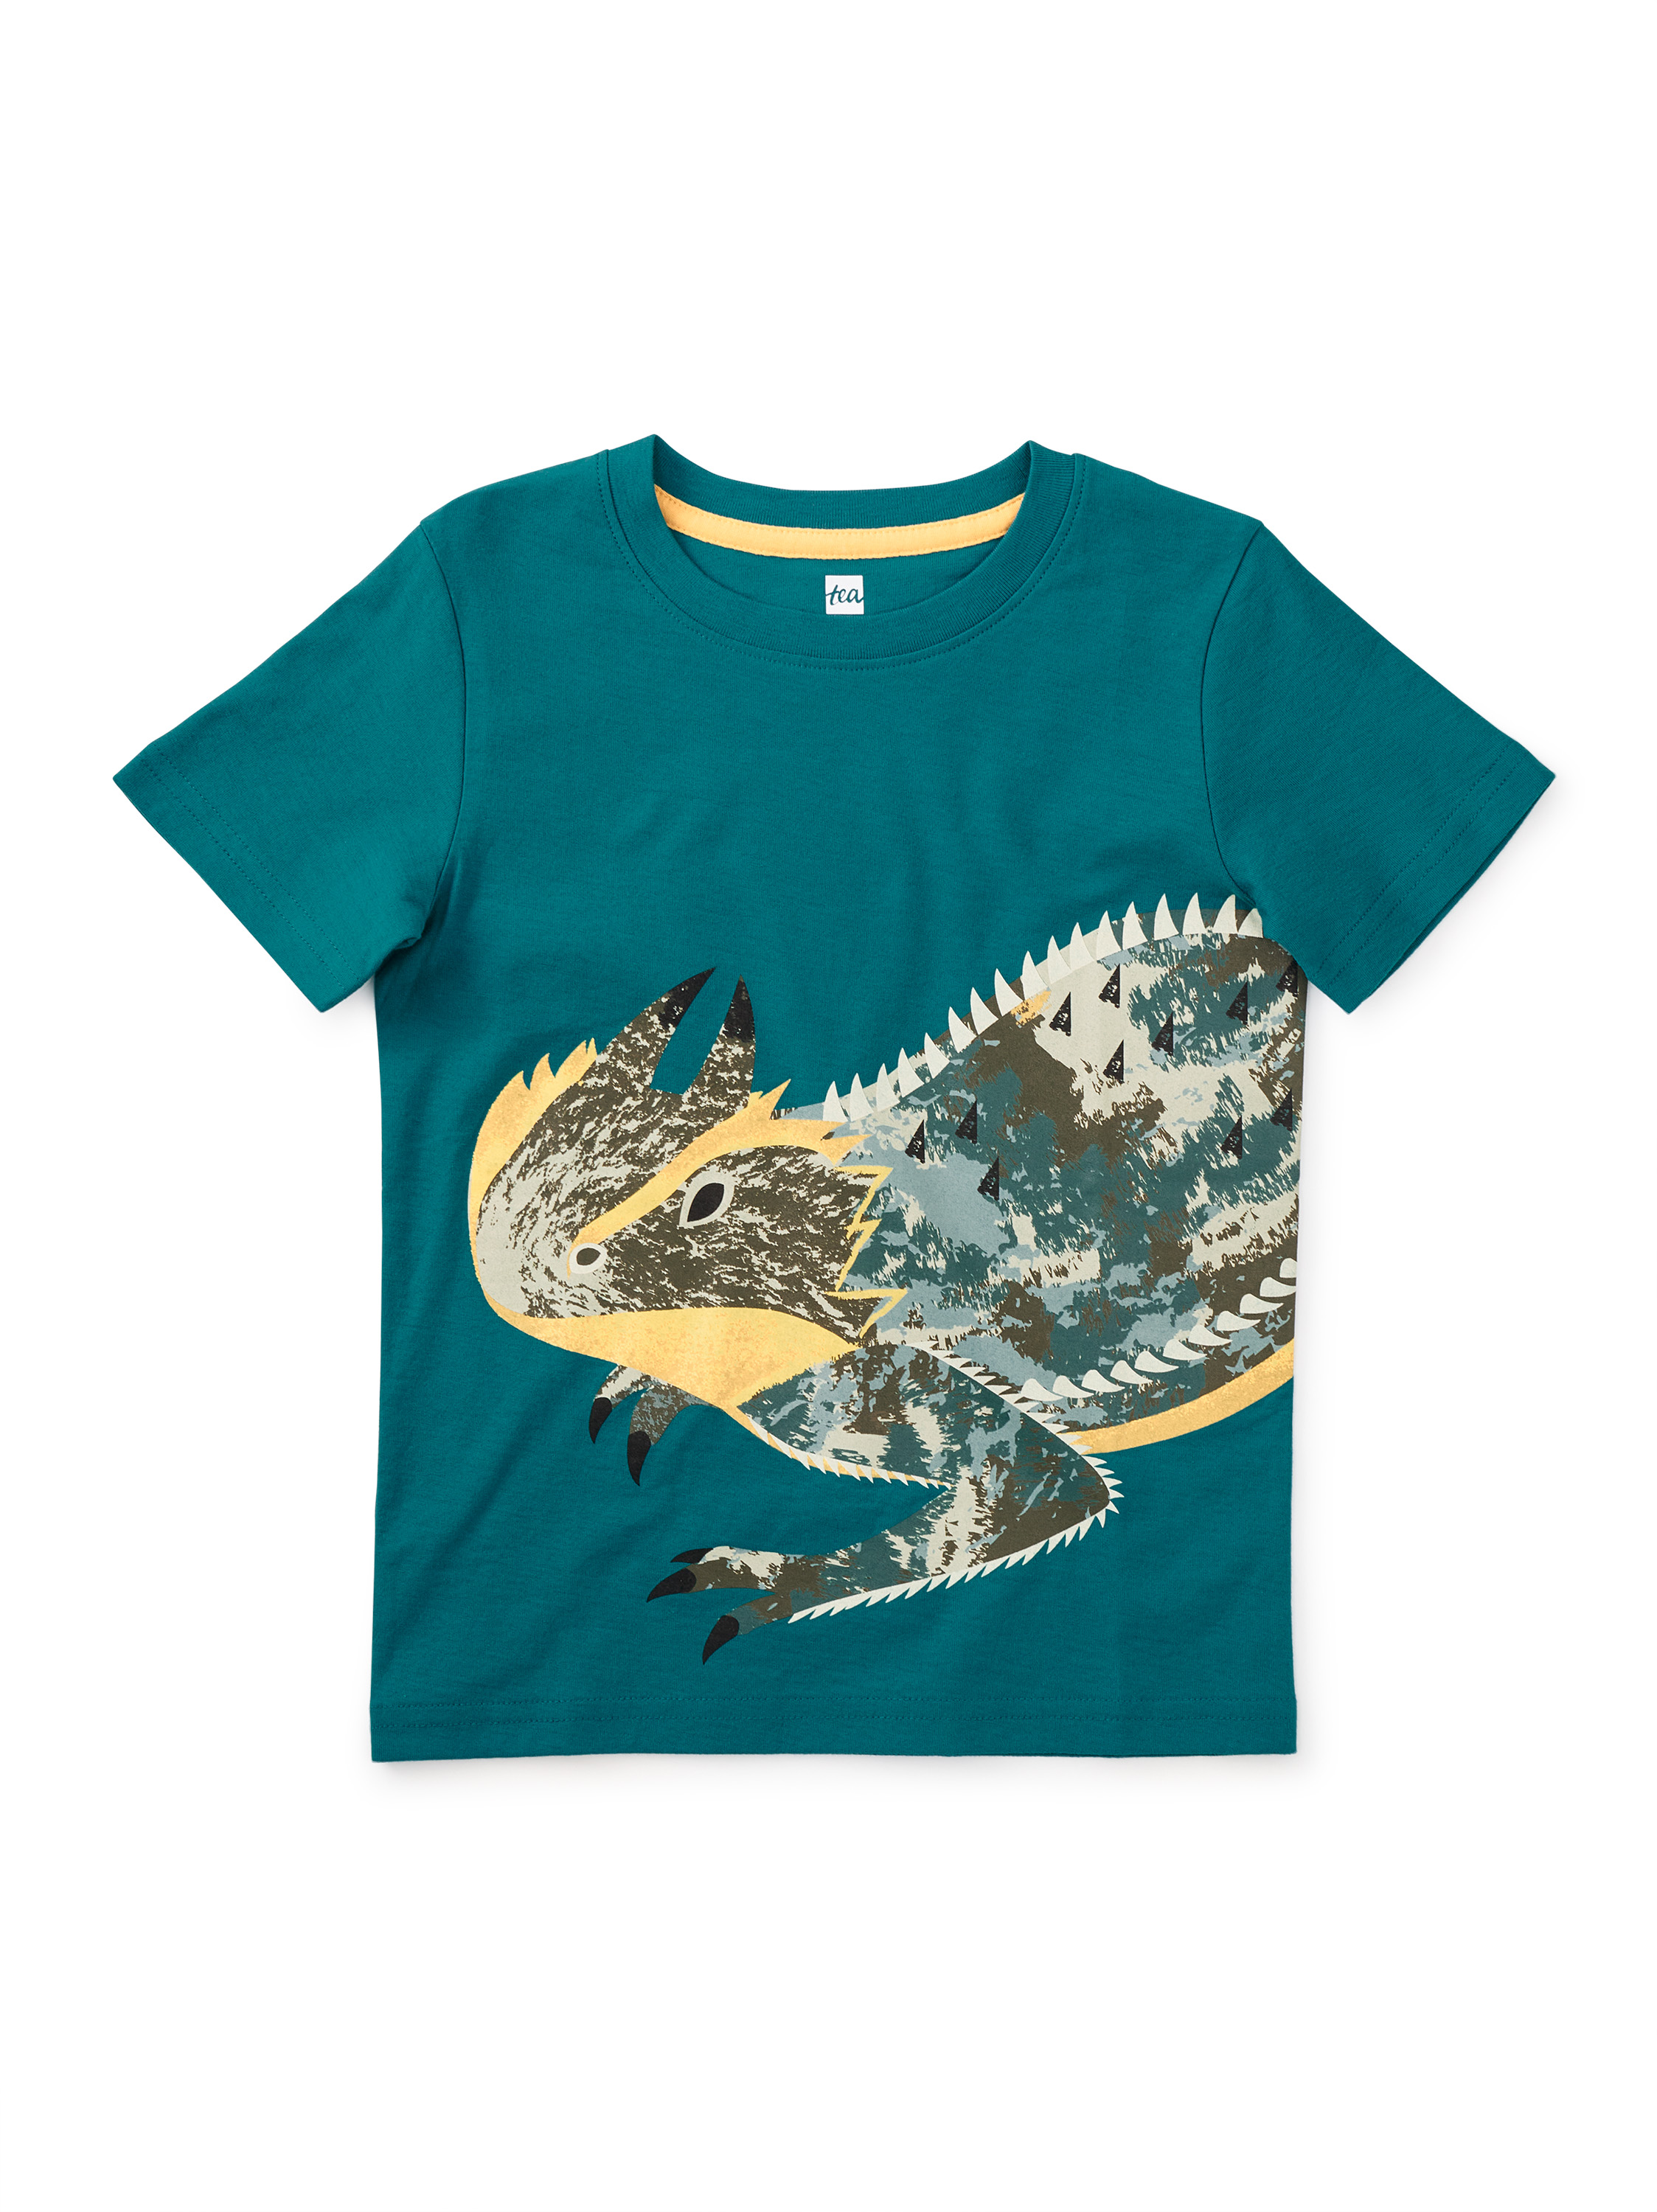 Horned Lizard Graphic Tee | Tea Collection